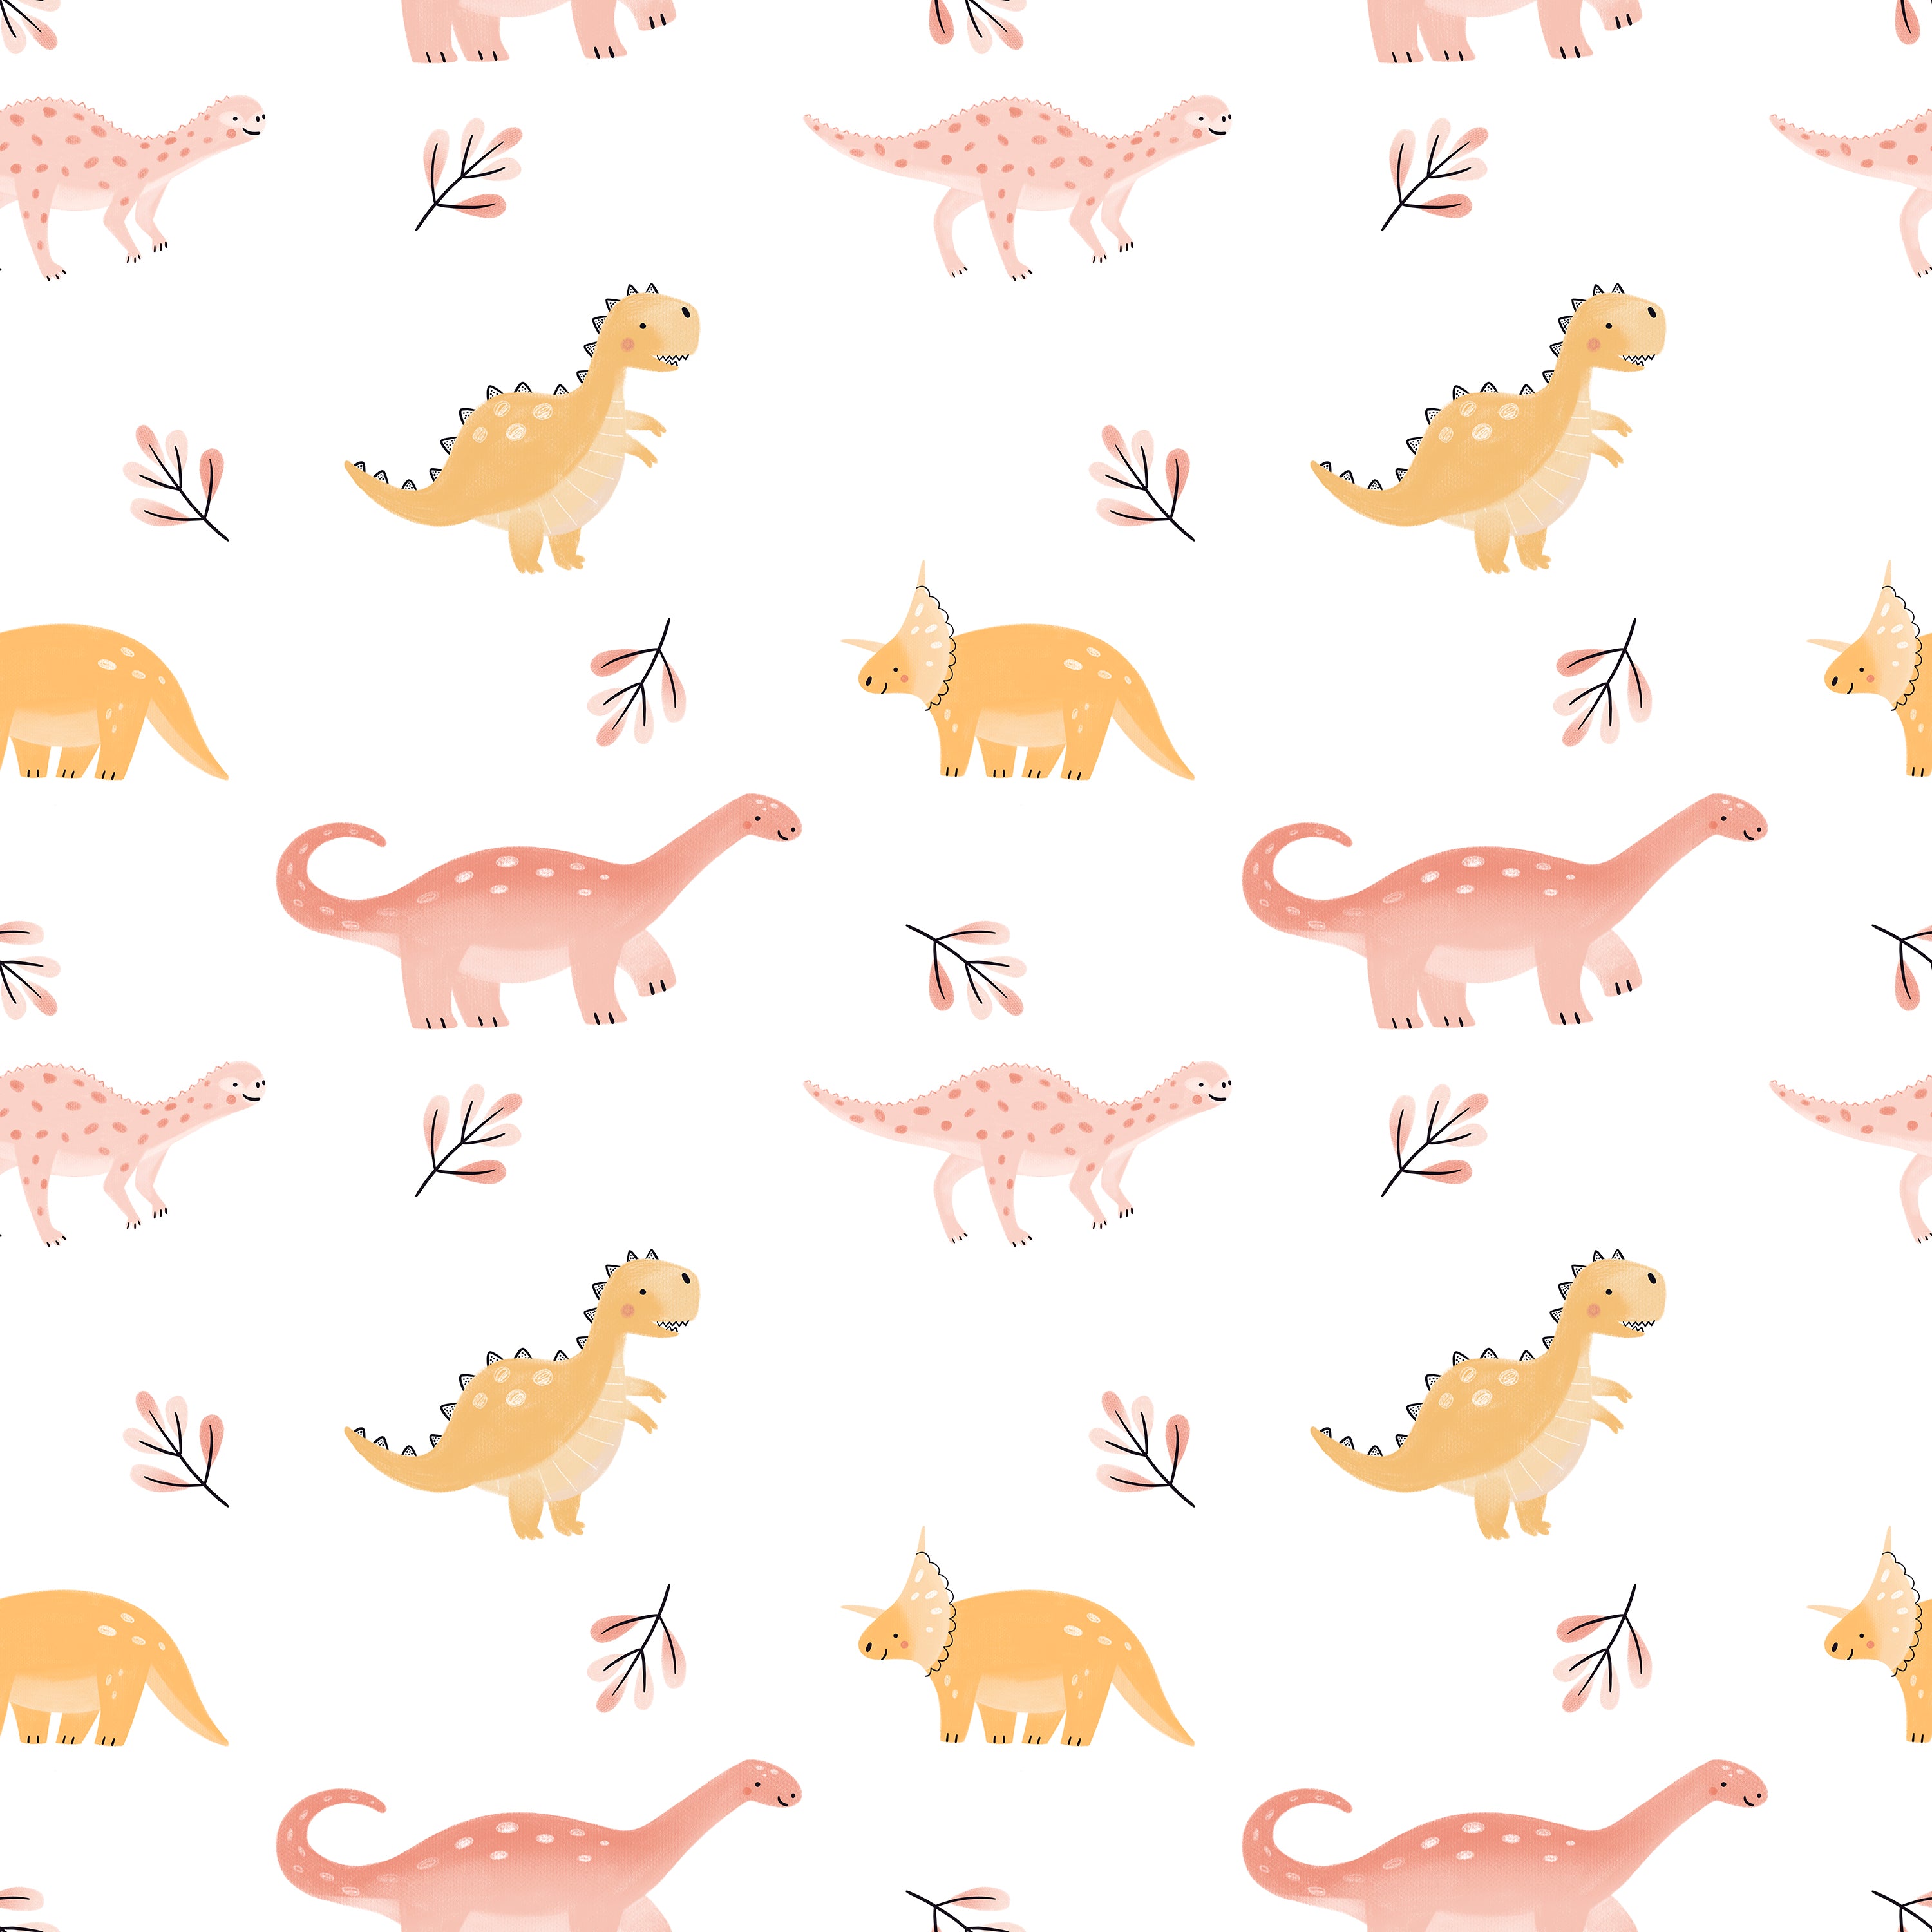 Close-up of Dino Days Wallpaper III with pastel dinosaurs and decorative leavesA playful wallpaper design titled "Dino Days Wallpaper III," featuring a variety of cartoon dinosaurs in pastel shades of pink, yellow, and peach. The dinosaurs are depicted in gentle, friendly poses amid whimsical foliage, making it an inviting and imaginative choice for children's rooms.